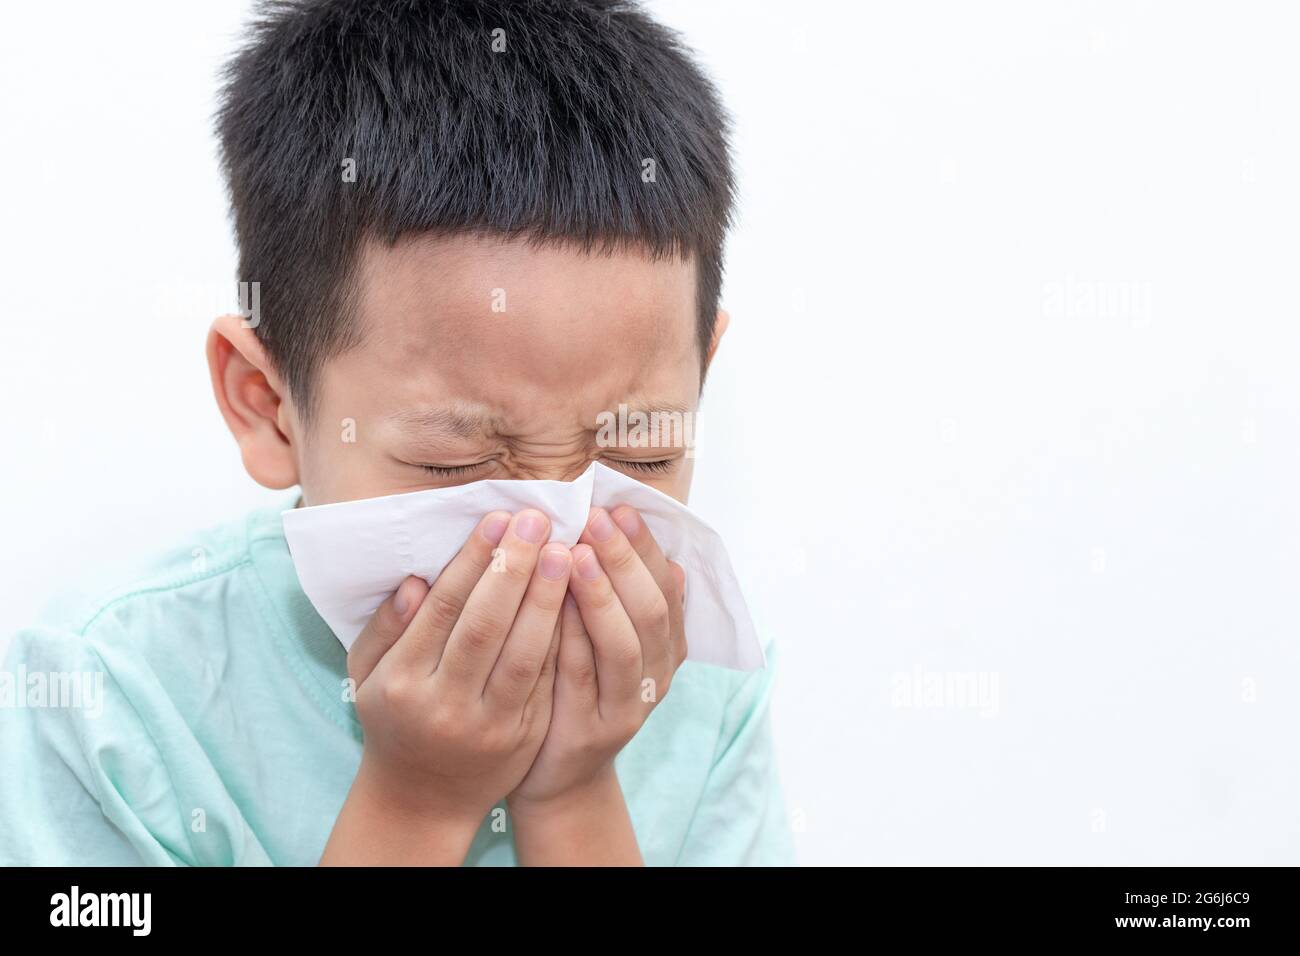 Asian little boy blowing his nose or cleaning nose with tissue. The little boy was sick and was sneezing isolated white background. Stock Photo